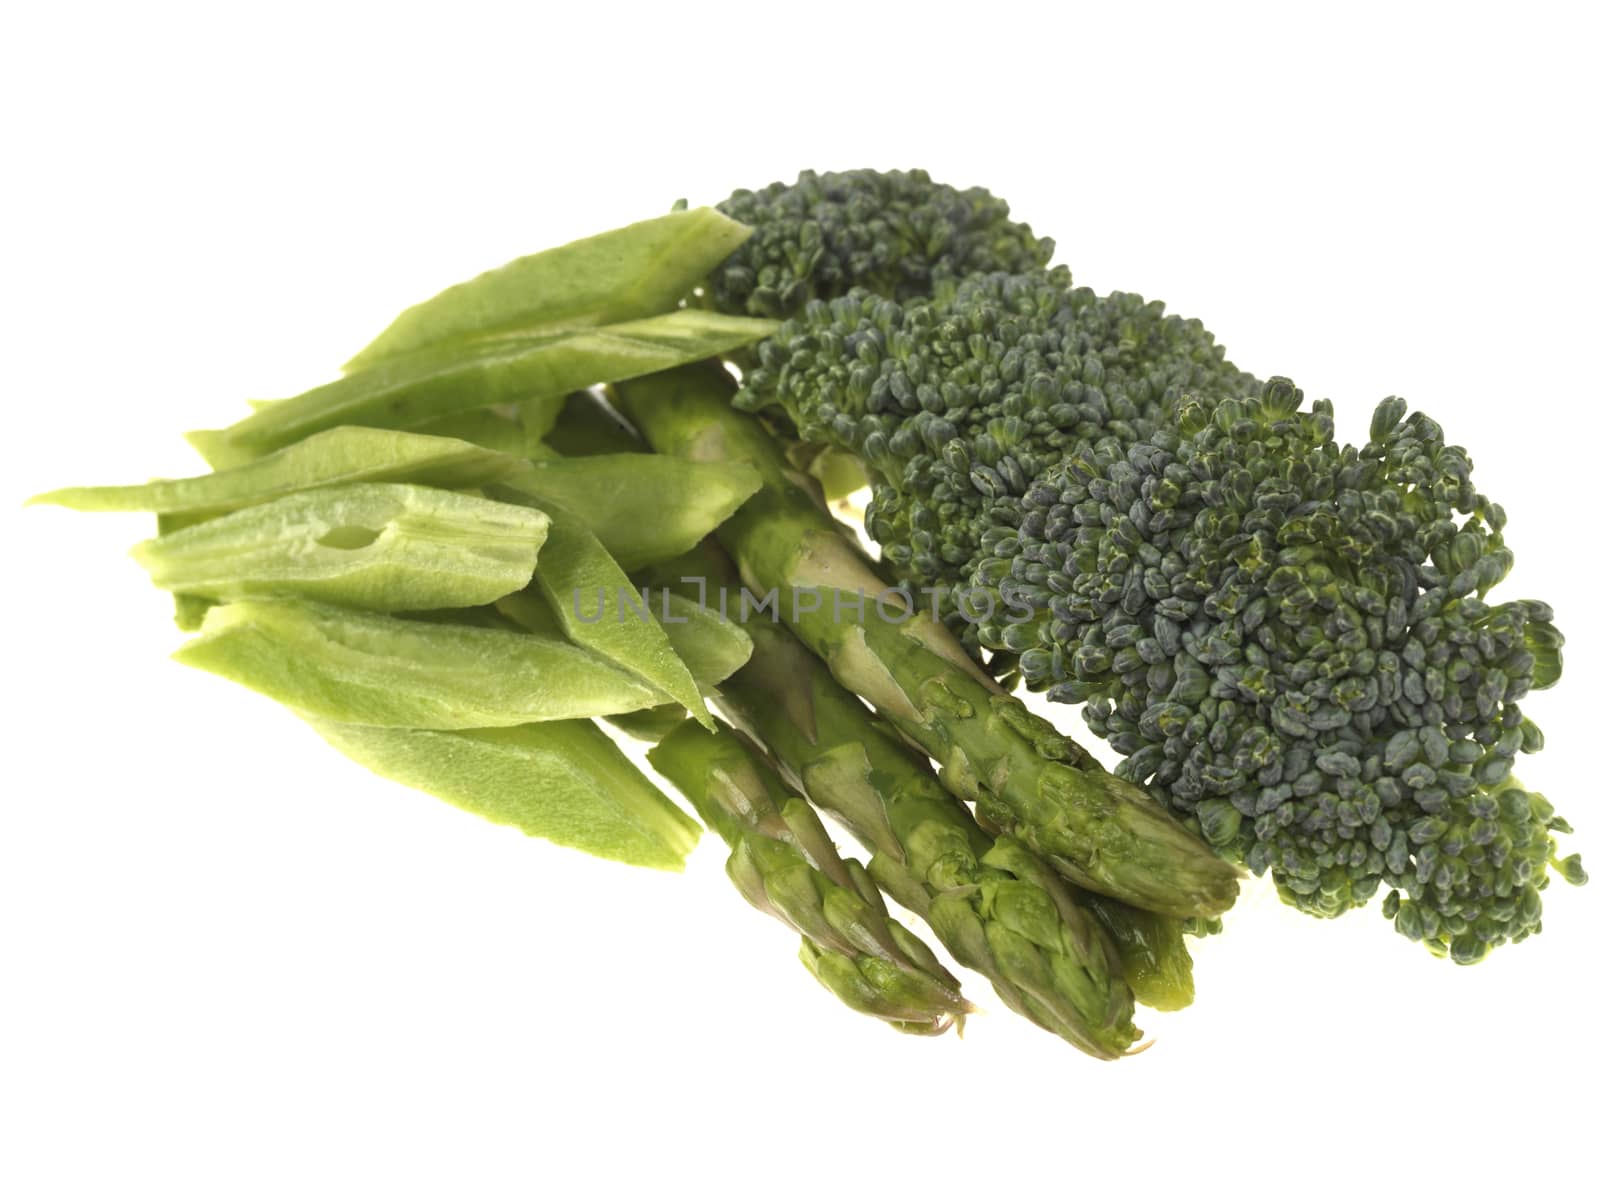 Broccoli Asparagus and Runner Beans by Whiteboxmedia